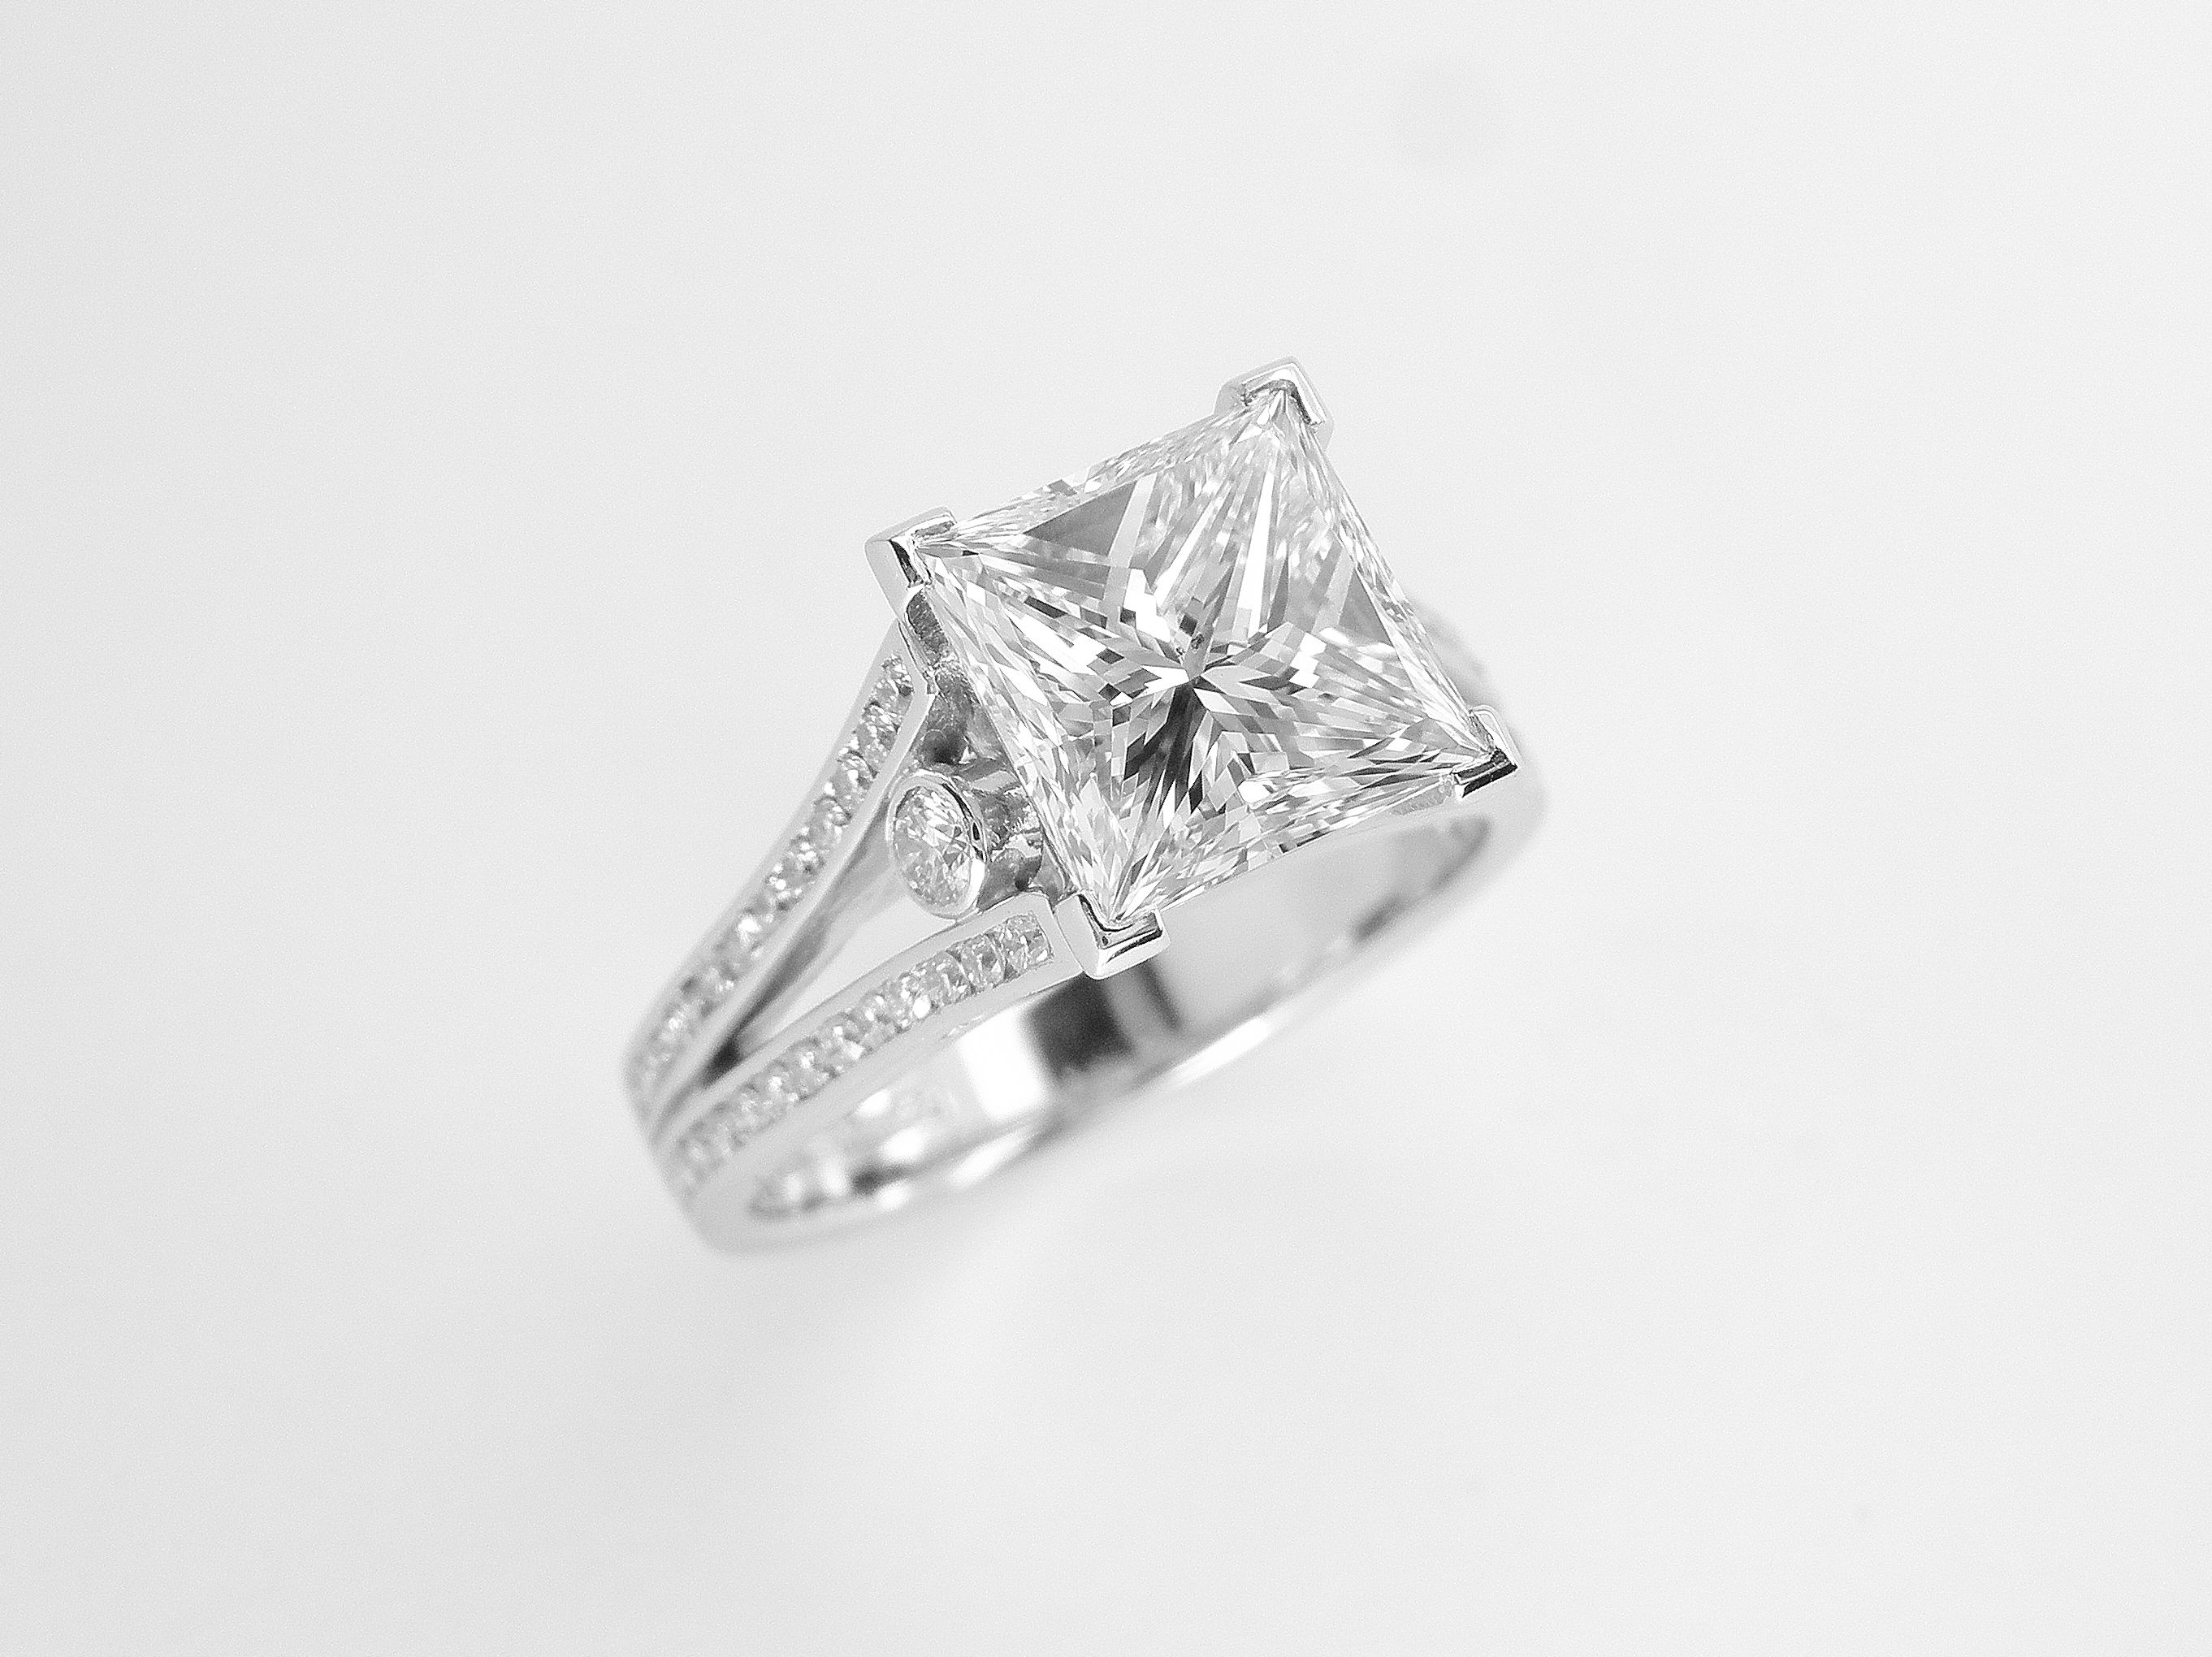 A 2.01ct. 'G' colour Princess cut diamond mounted in a split shoulder platinum ring mount with small round brilliant cut diamonds channel set in shoulders. Ideal diamond size 1.5ct to 5ct